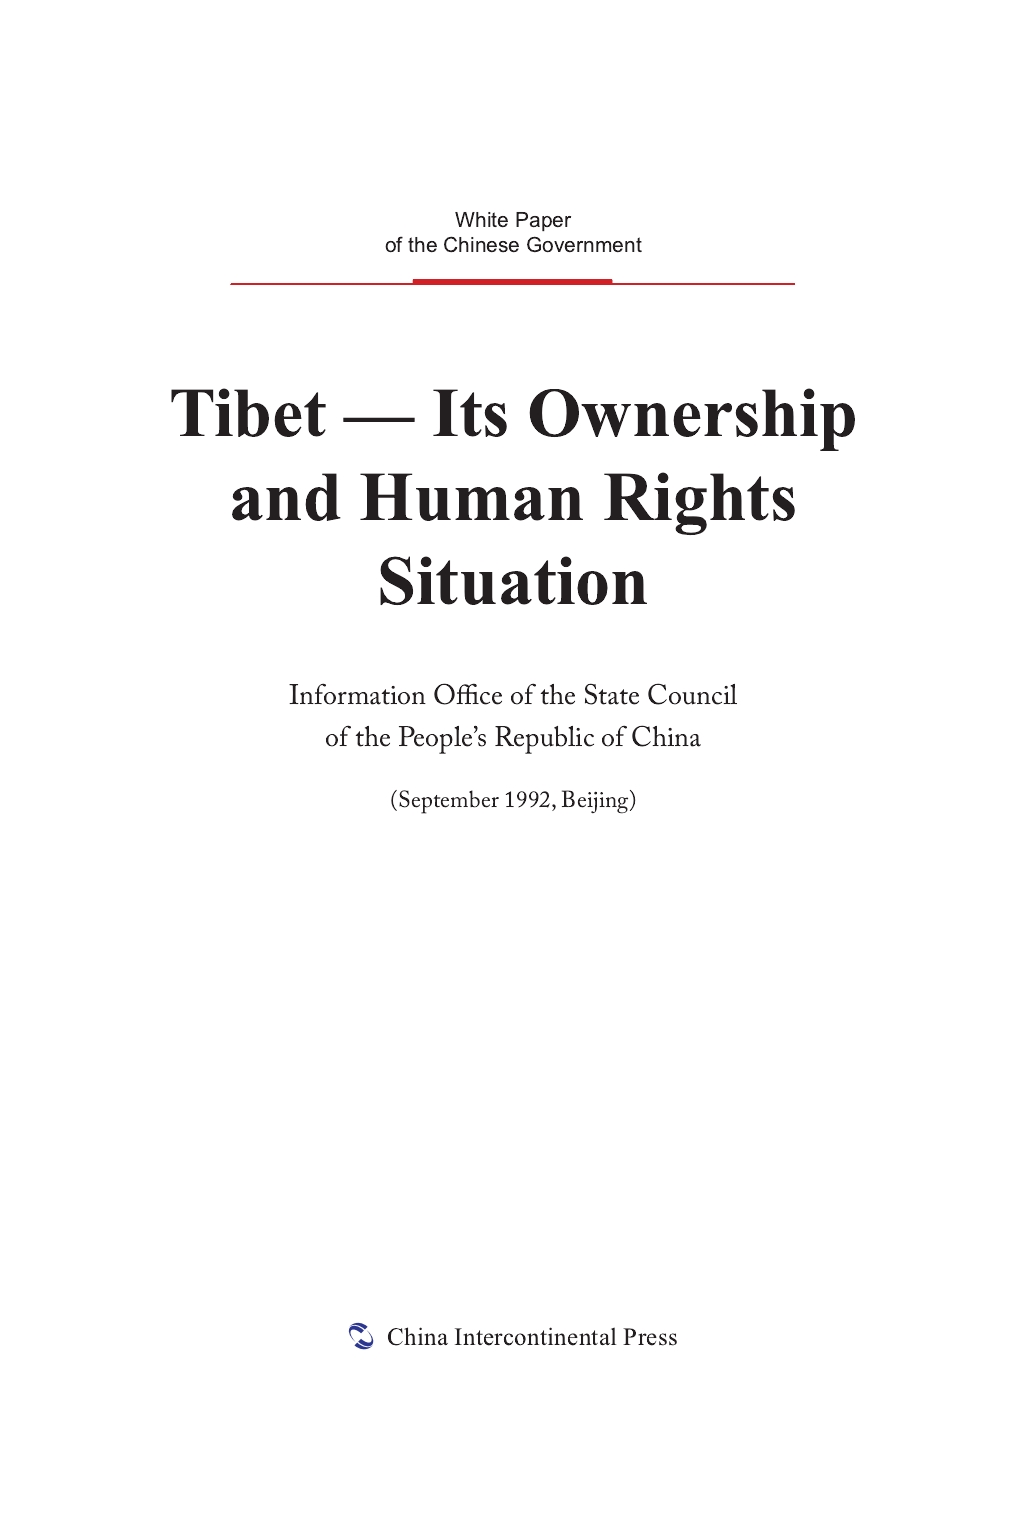 Tibet—Its Ownership and Human Rights Situation